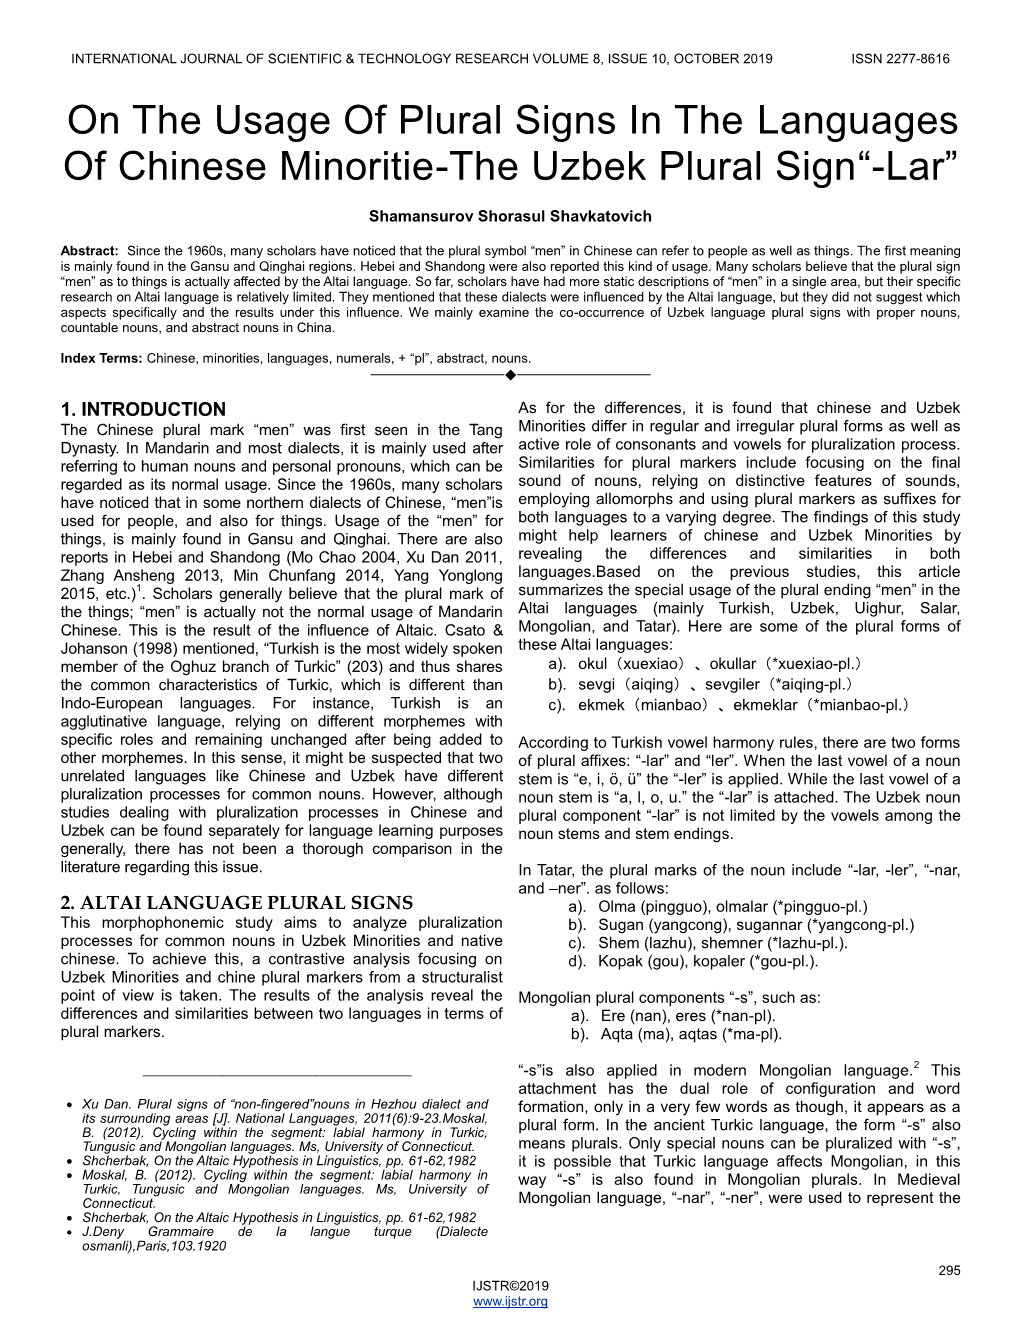 On the Usage of Plural Signs in the Languages of Chinese Minoritie-The Uzbek Plural Sign―-Lar‖